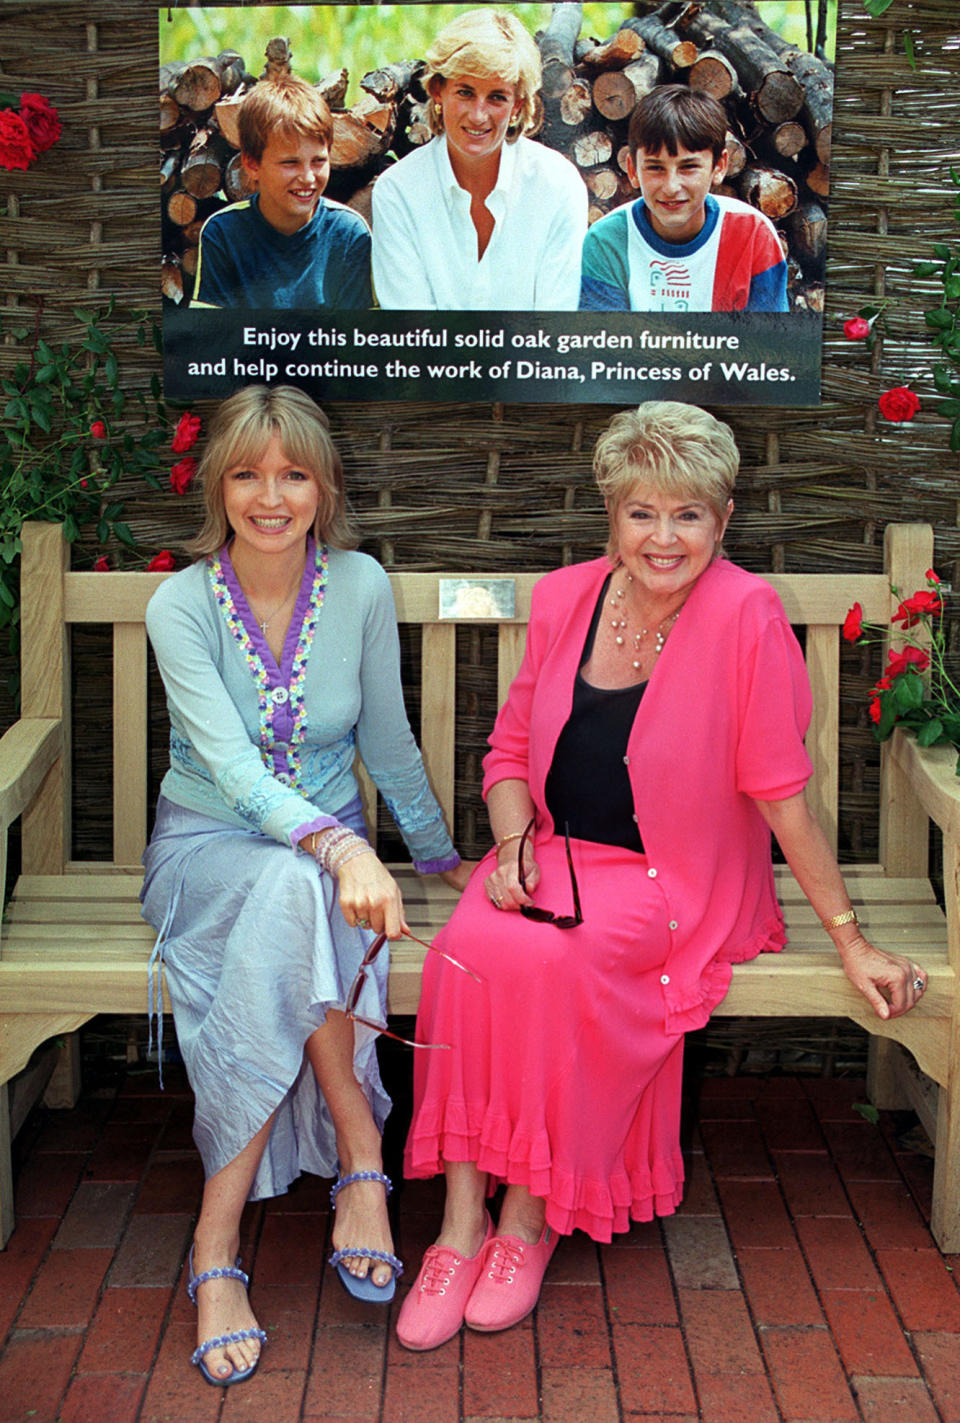 TV presenters and mother and daughter Gloria Hunniford (L) and Caron Keating sit on the Diana, Princess of Wales garden bench at the Chelsea Flower Show. The Memorial Fund has agreed to licence the seat in her memory, to help provide jobs in Bosnia.  * Gradacac, a town on the front line during the war in Bosnia. 14/04/2004: Former TV presenter Caron Keating died last night after losing her battle with cancer, family friend Peter Powell said, Wednesday April 14, 2004.